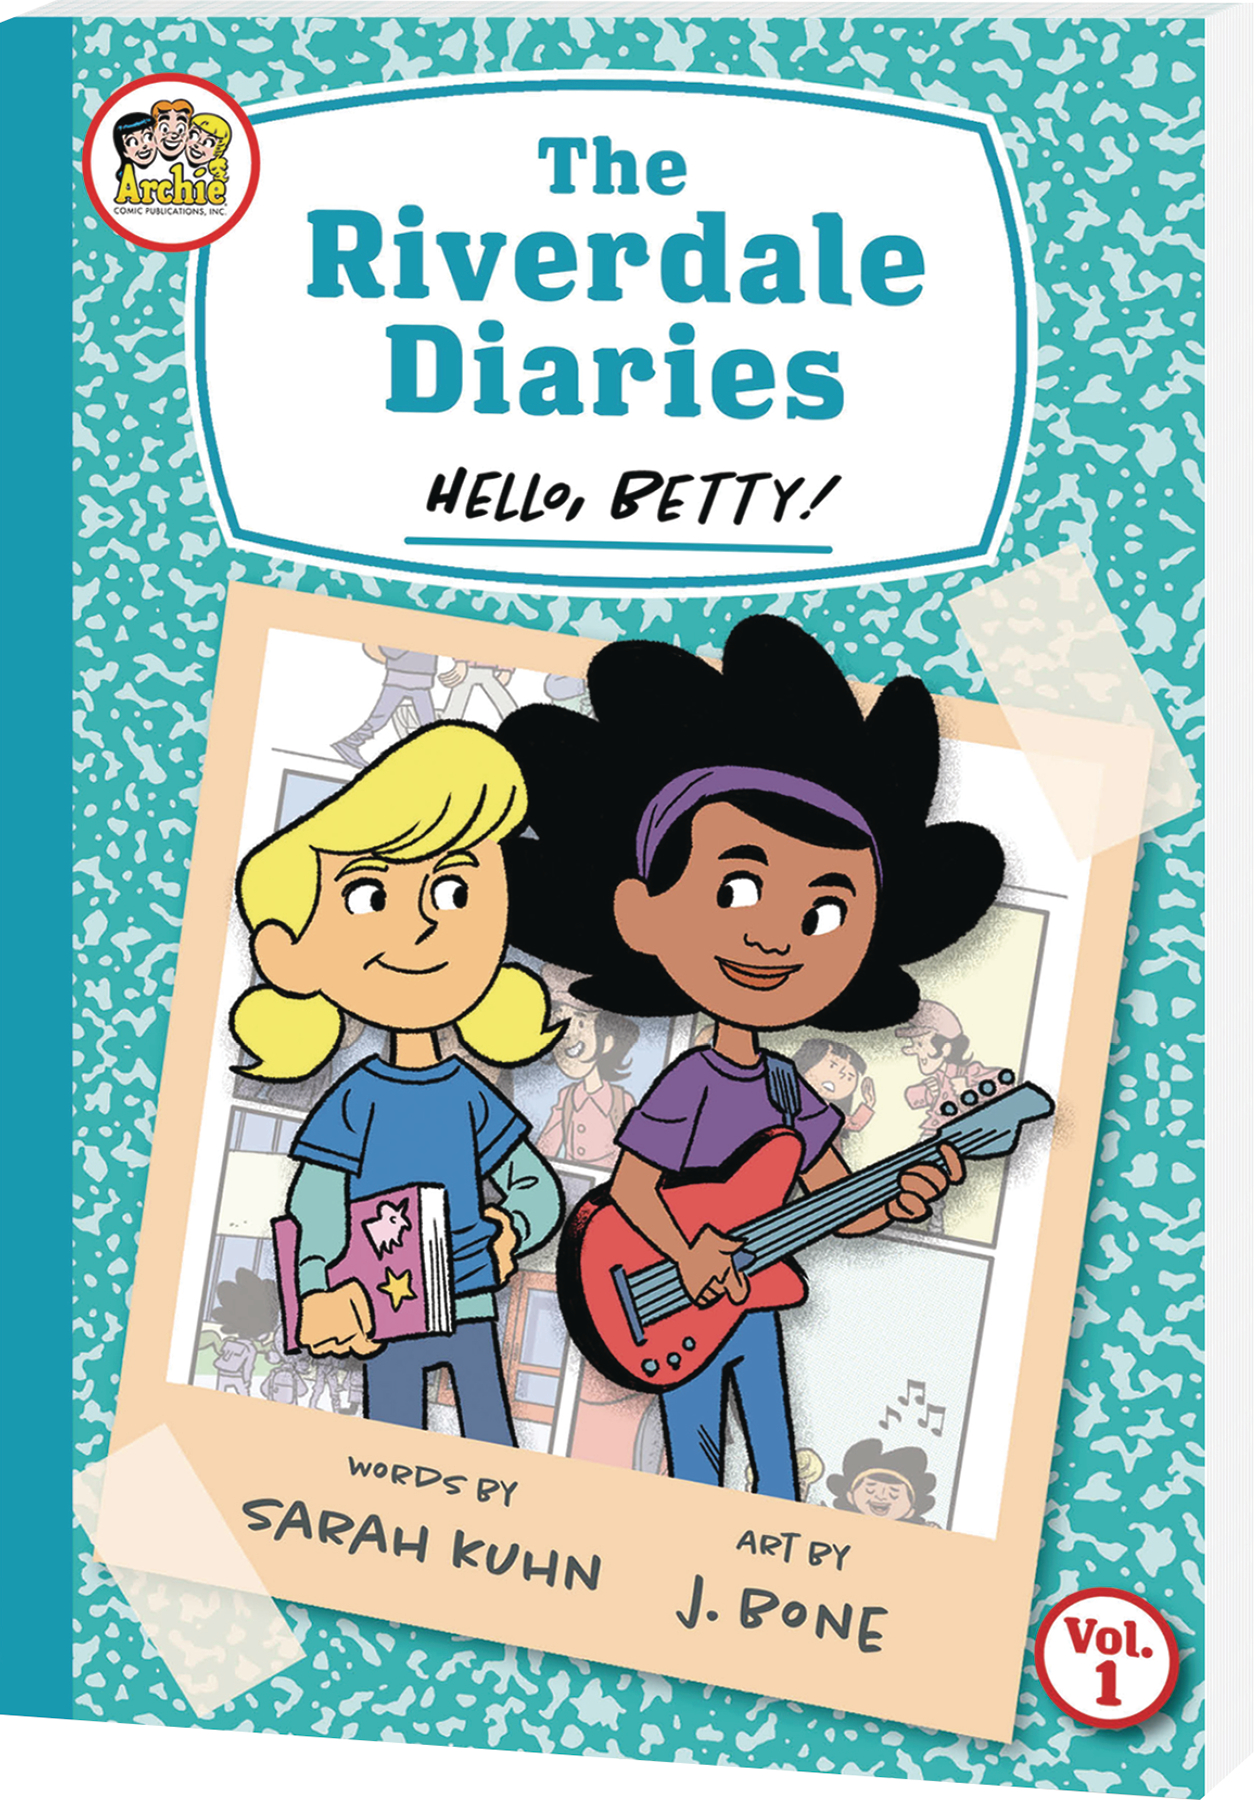 Riverdale Diaries Soft Cover Volume 1 Hello Betty